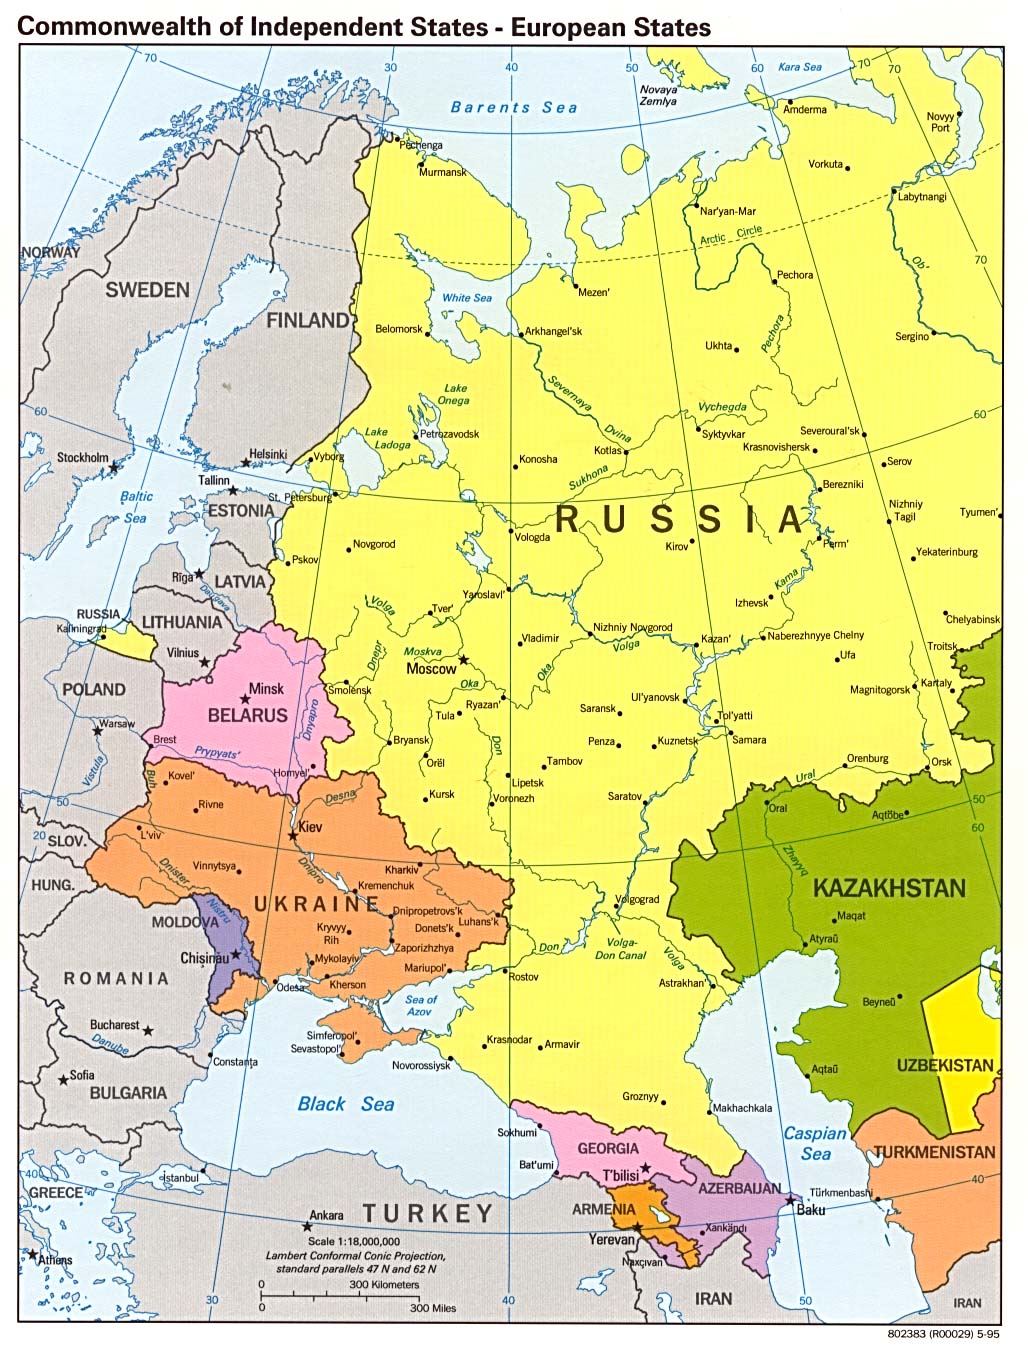 Maps of Russia, Commonwealth of Independent States - European States [Political Map] 1995 (286K)